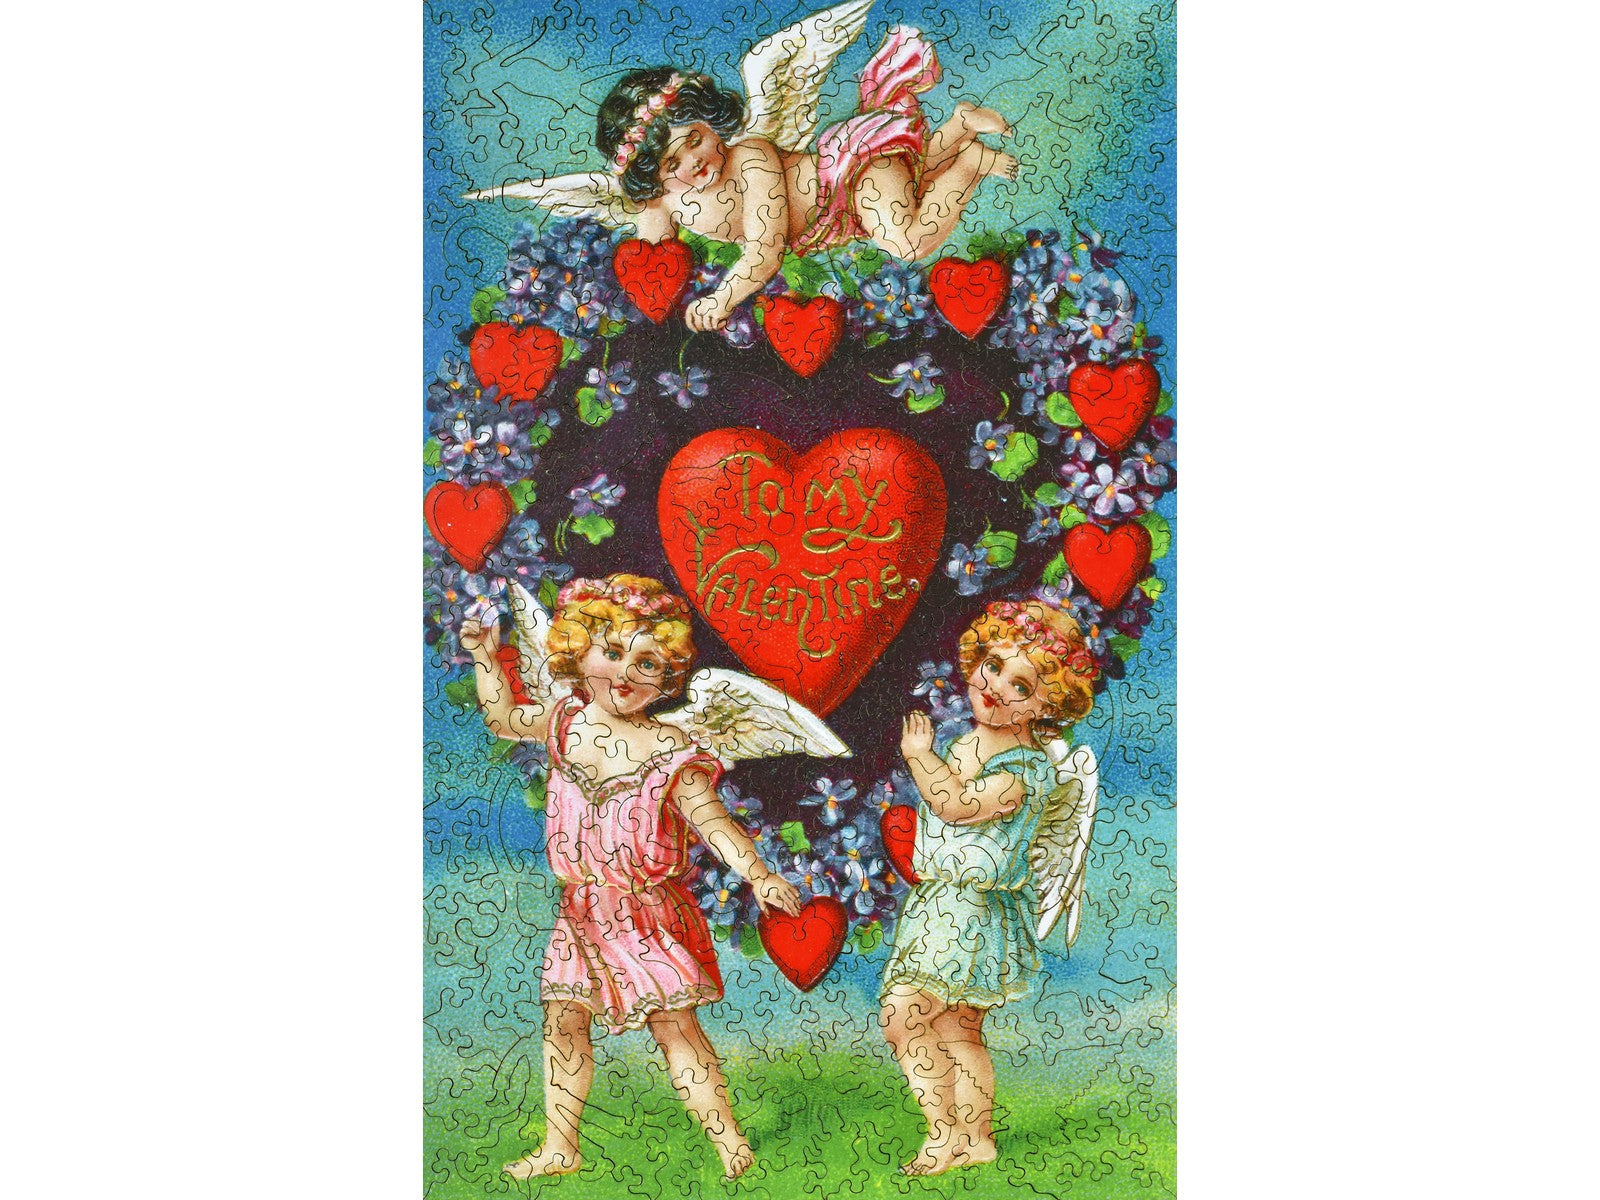 The front of the puzzle, Valentine with Cherubs, which shows three cherubs surrounding a heart and flowers.